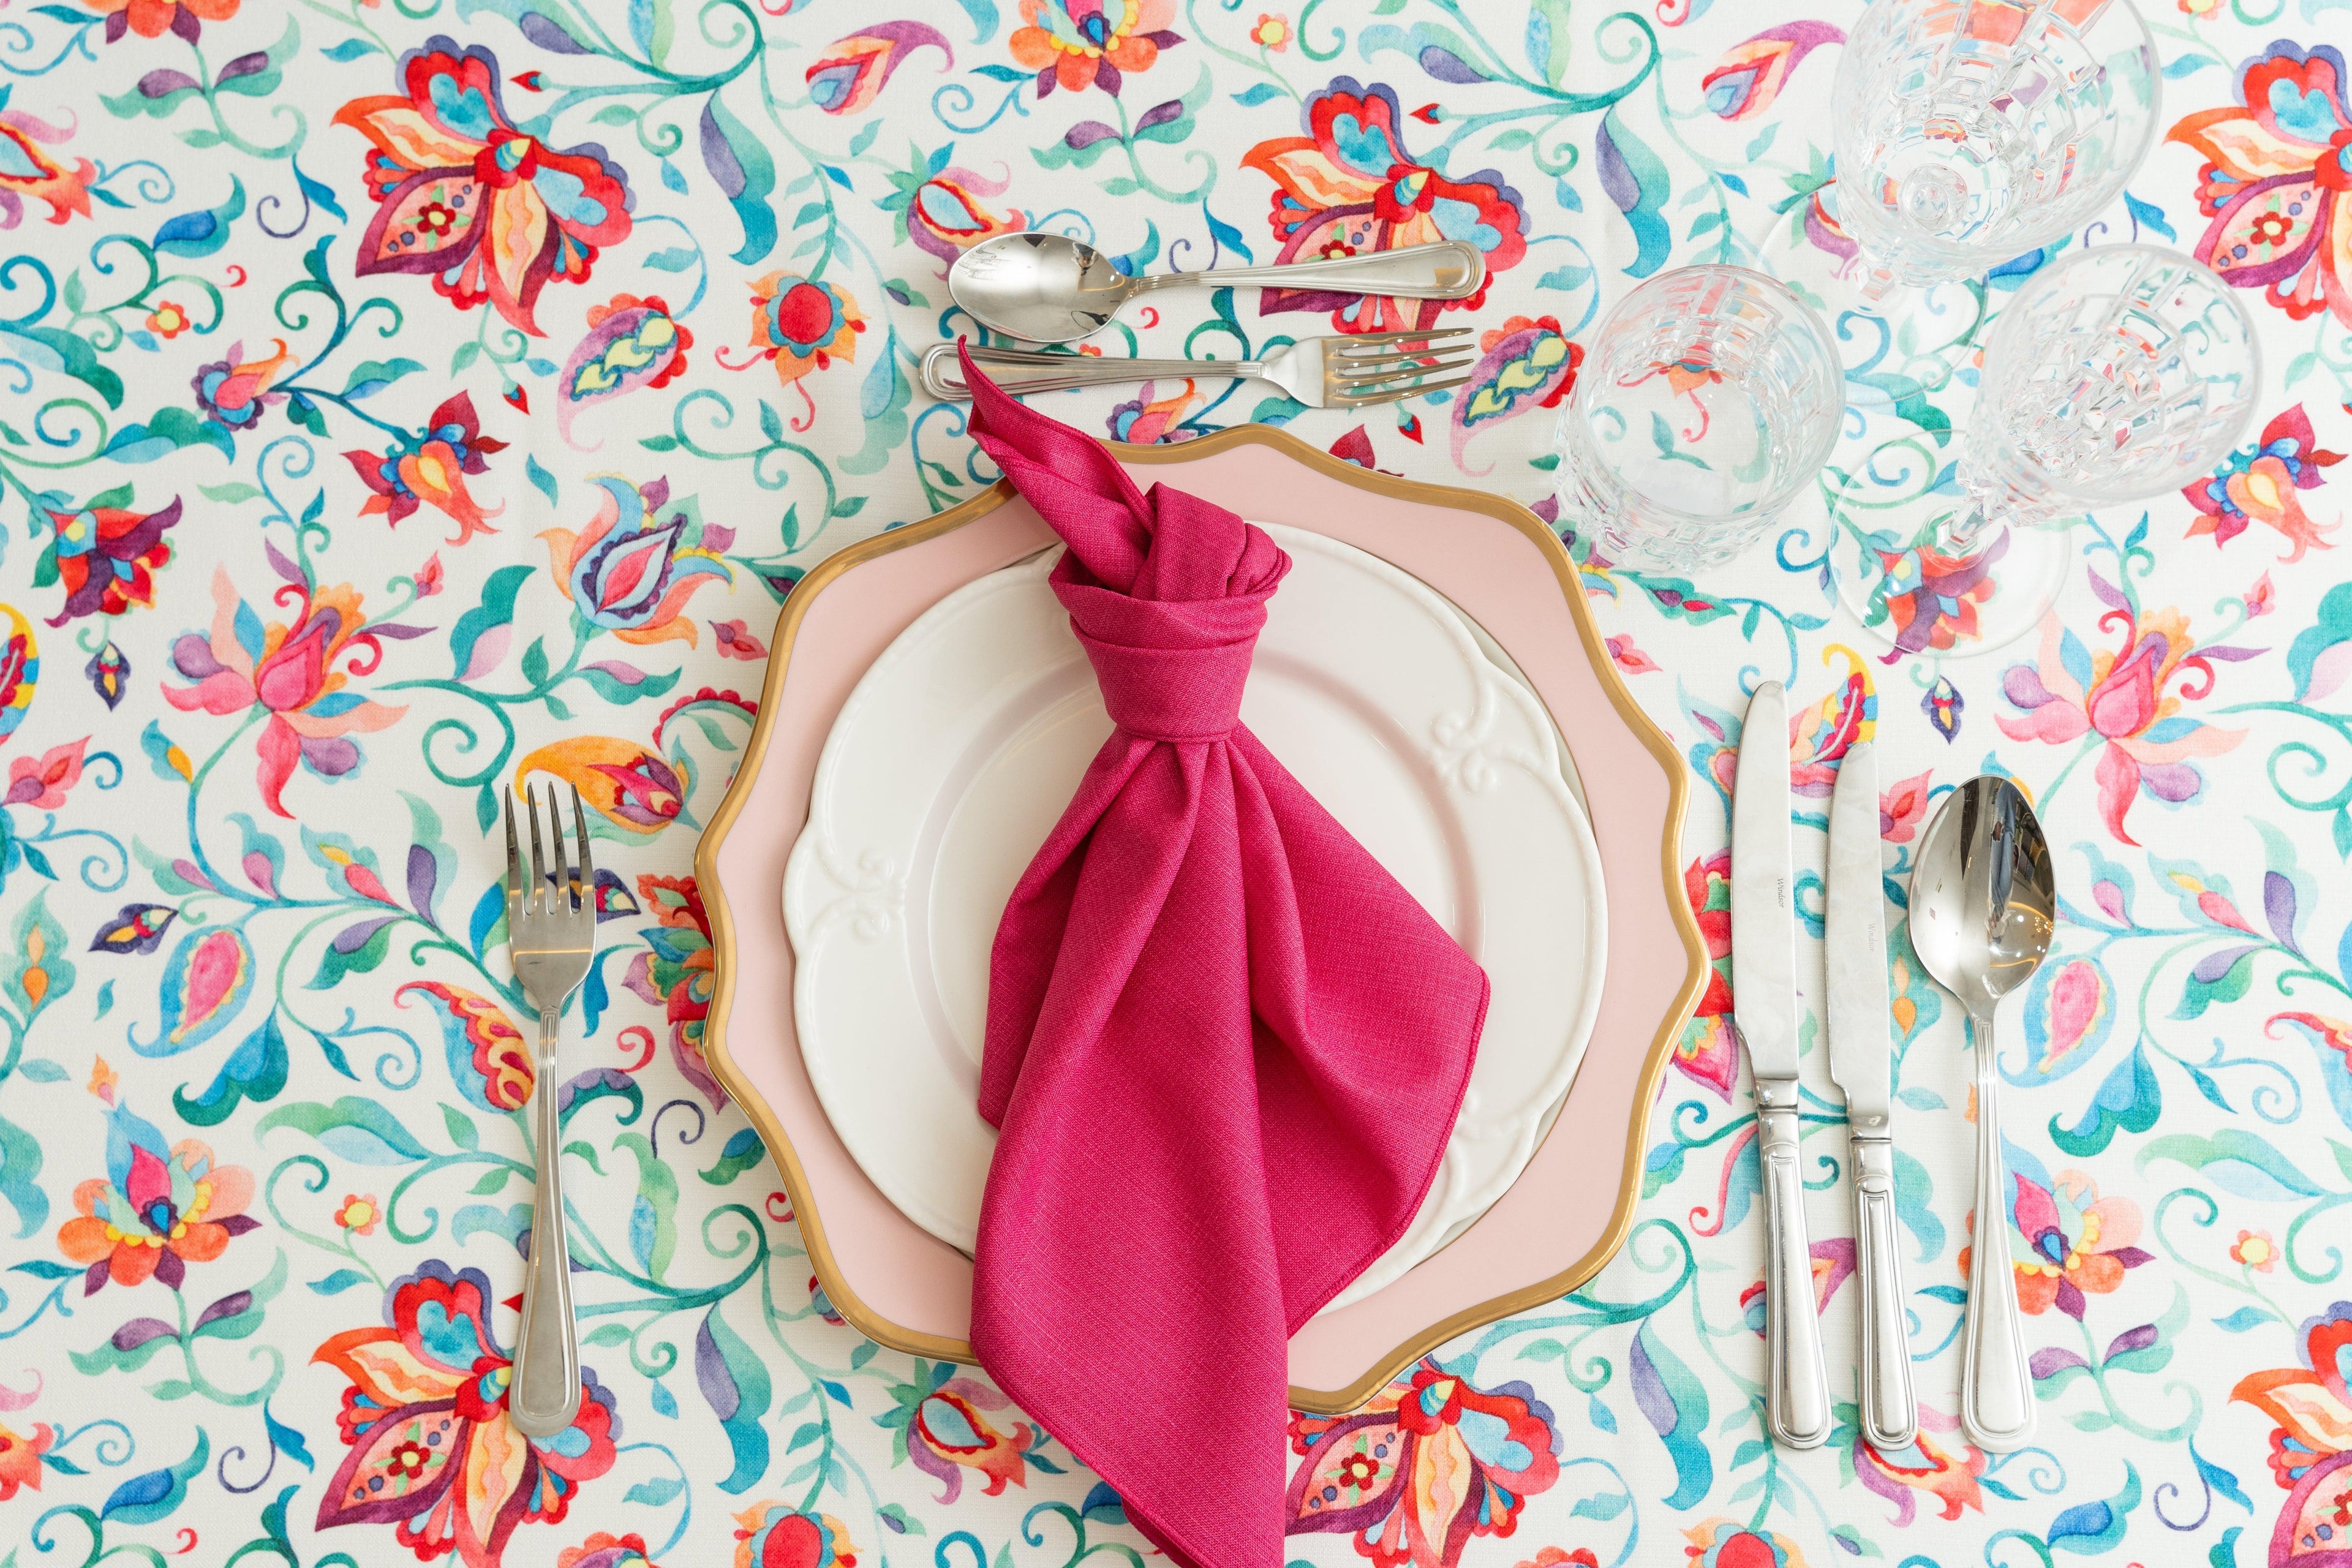 A plate with a napkin and silverware on a floral tablecloth